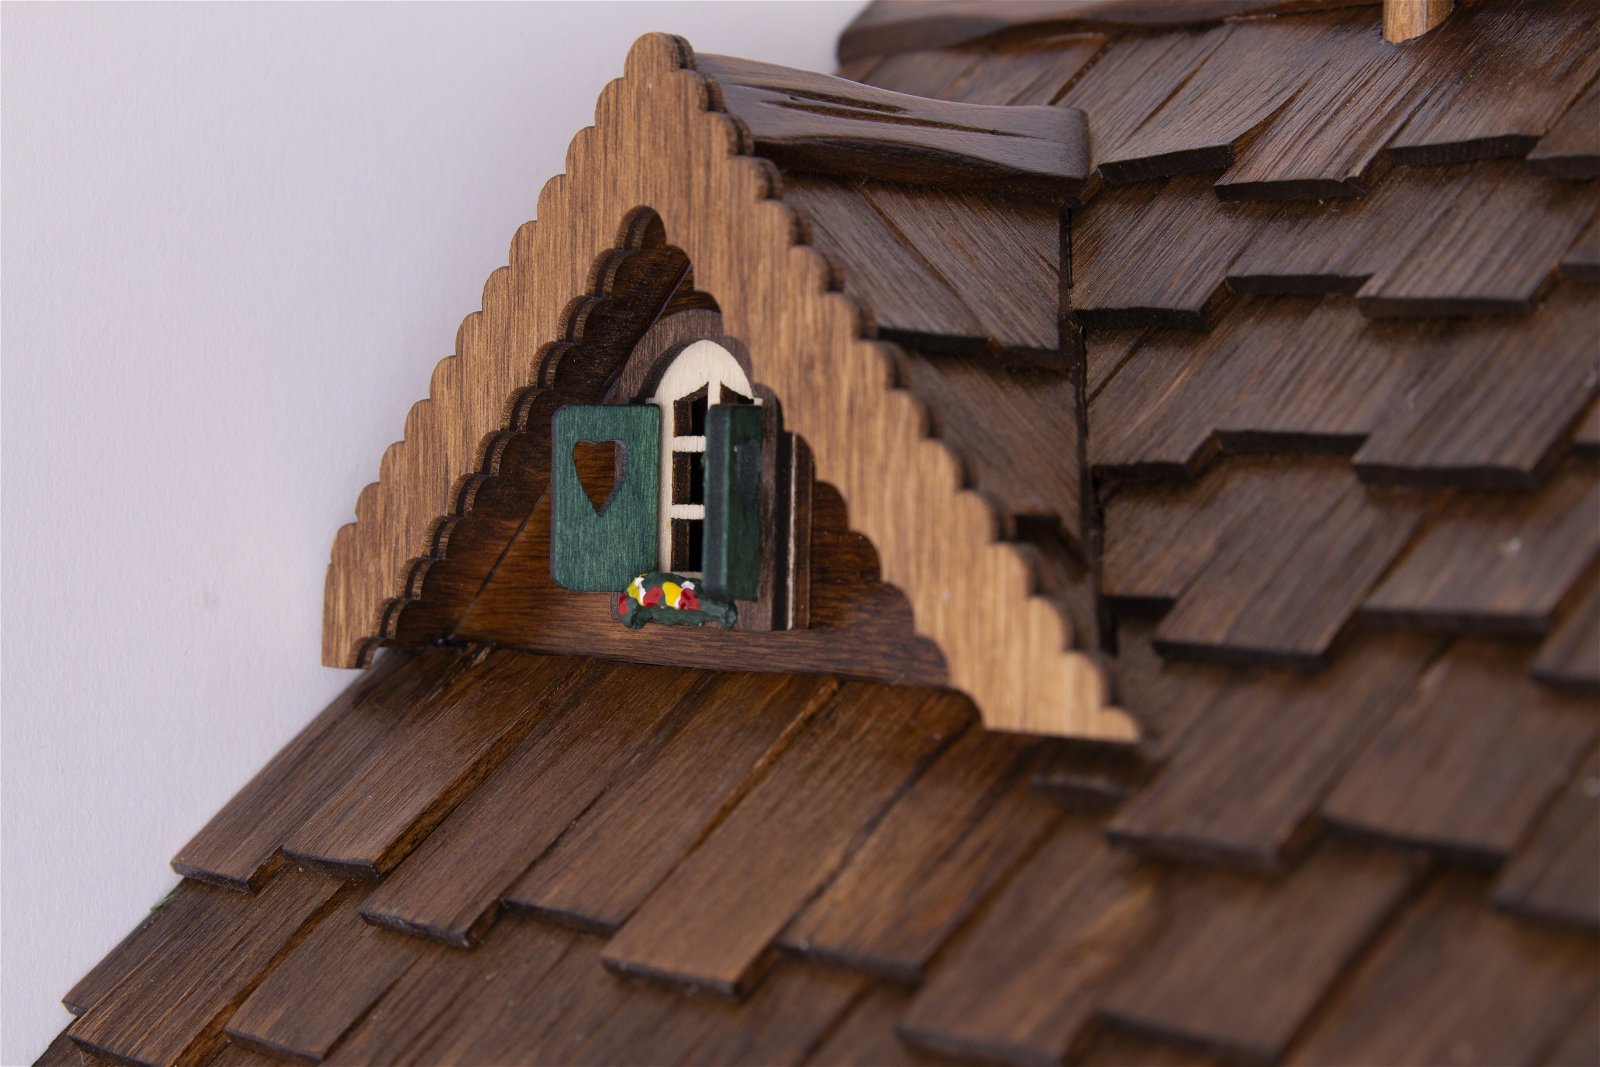 Cuckoo Clock 8-day-movement Chalet-Style 42cm by Engstler